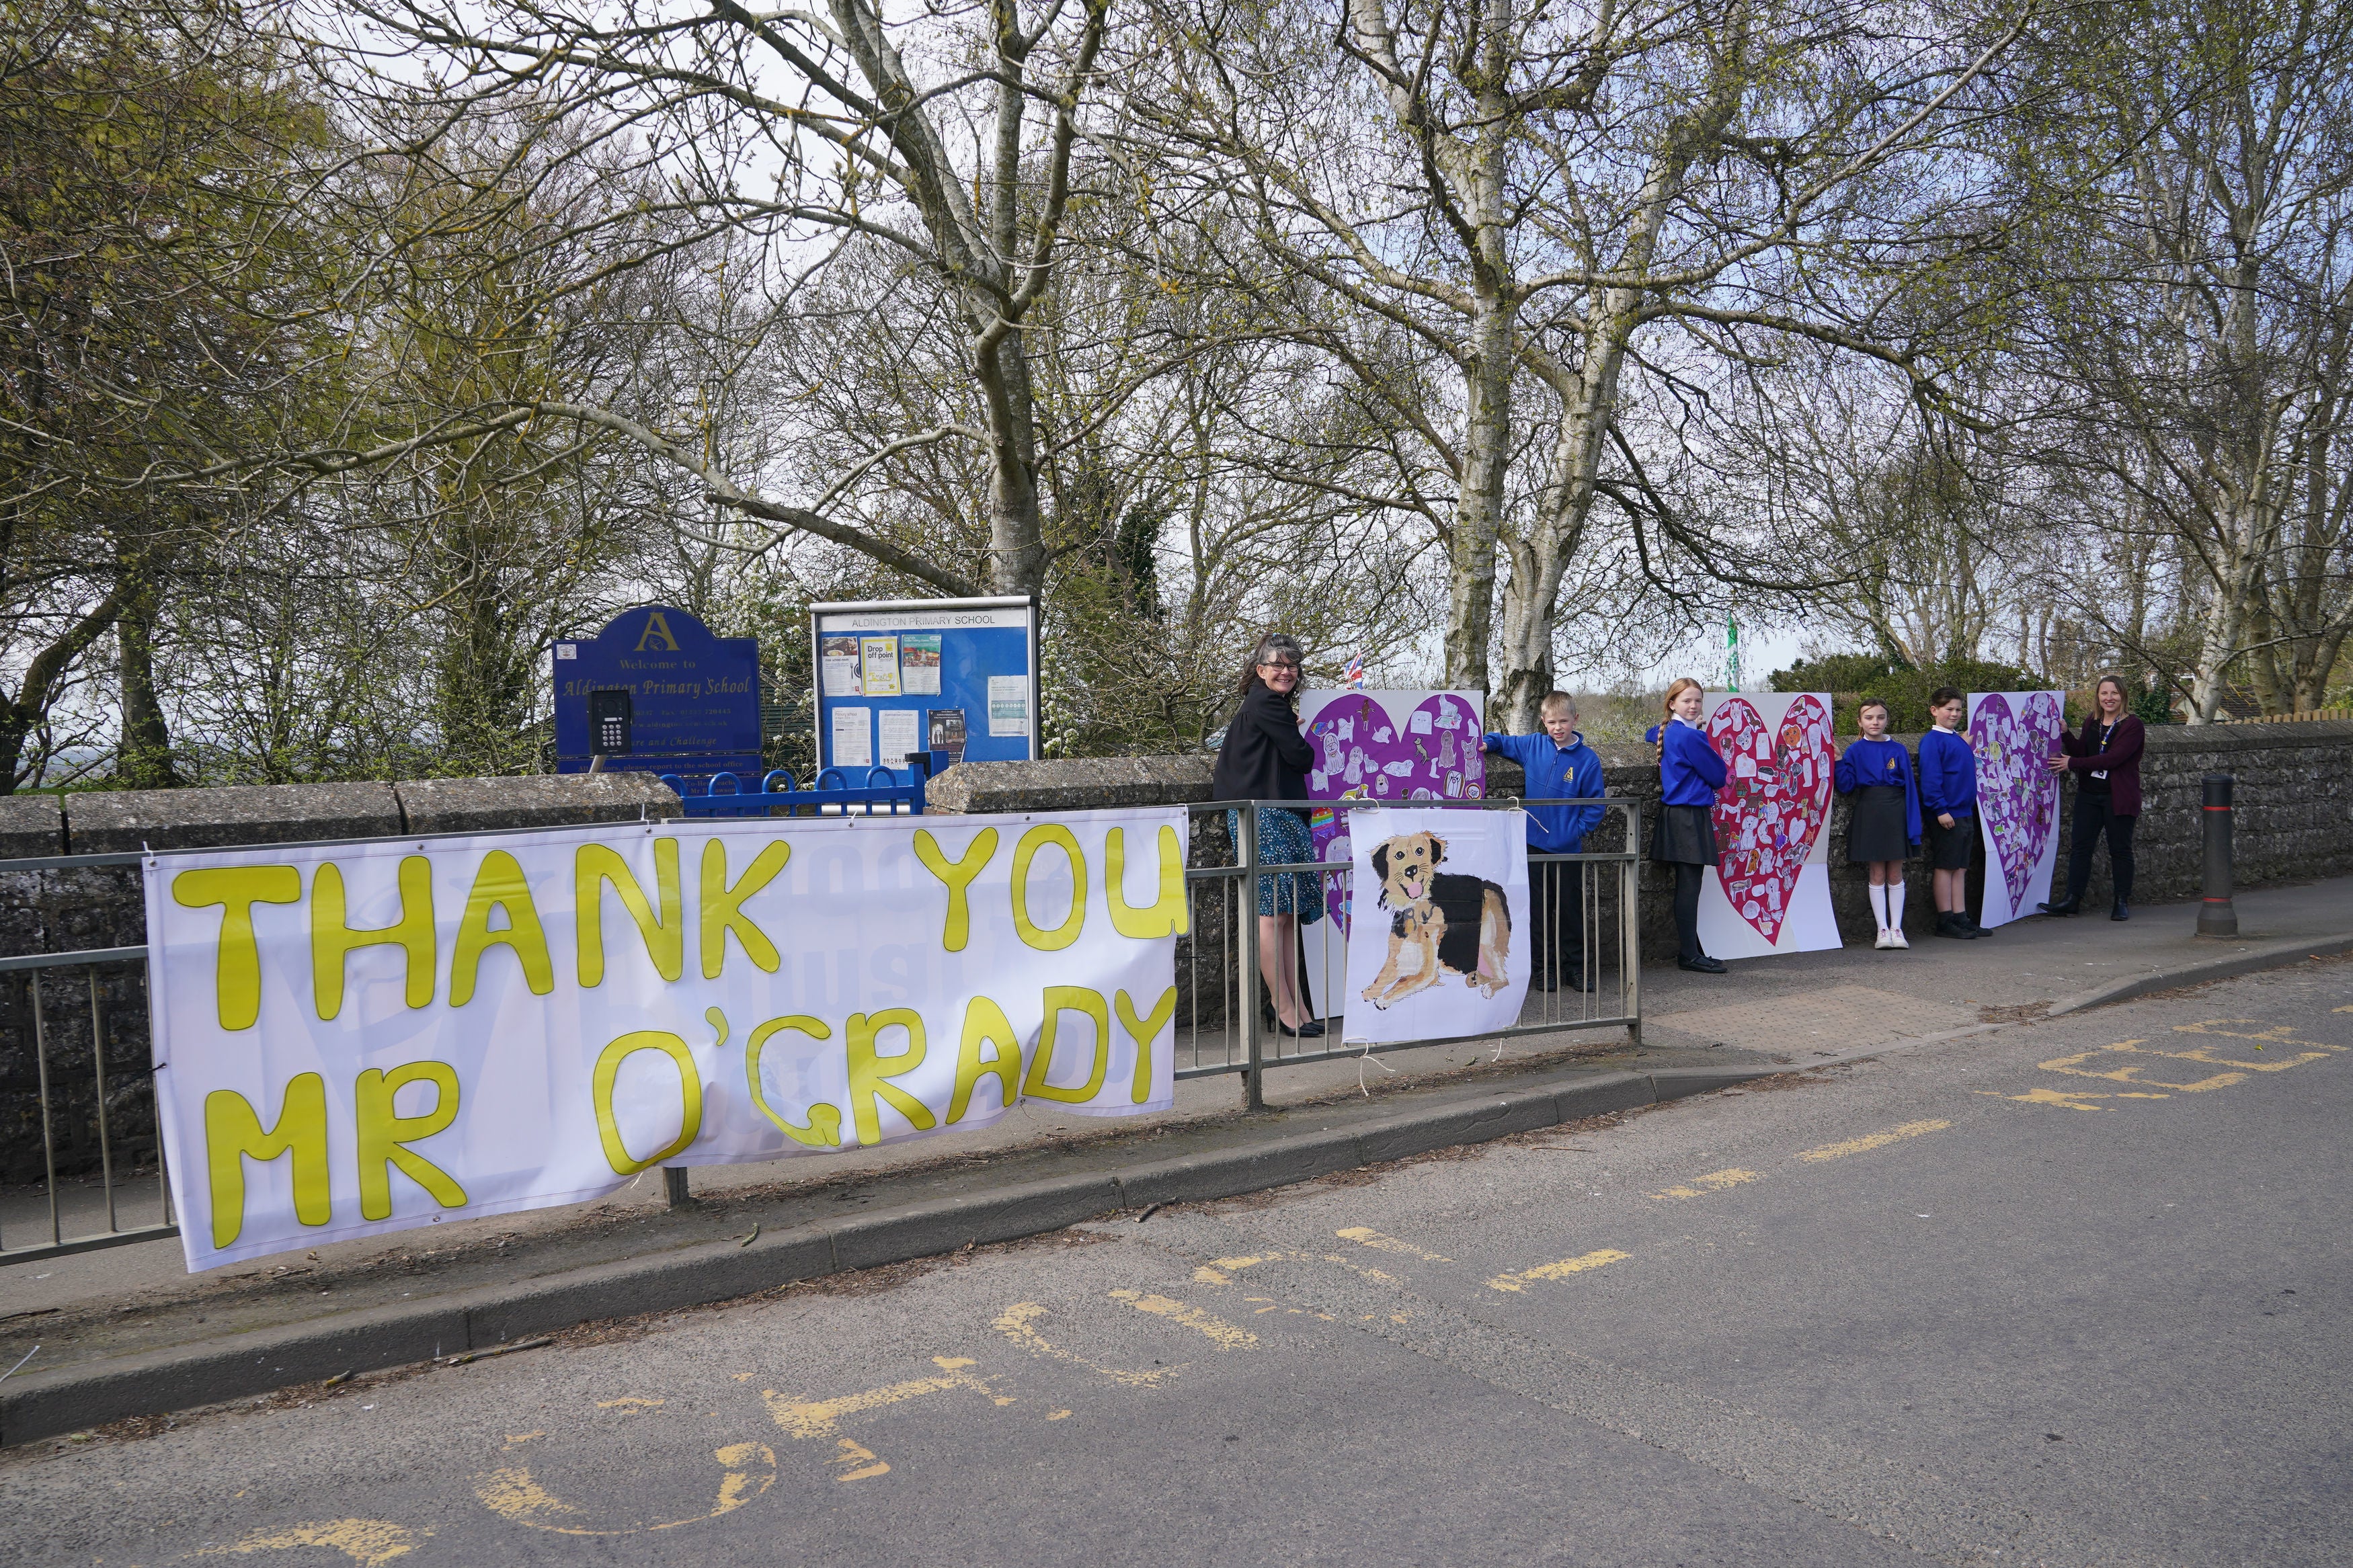 Pupils and teachers from Aldington Primary School pay their respects to Paul O’Grady